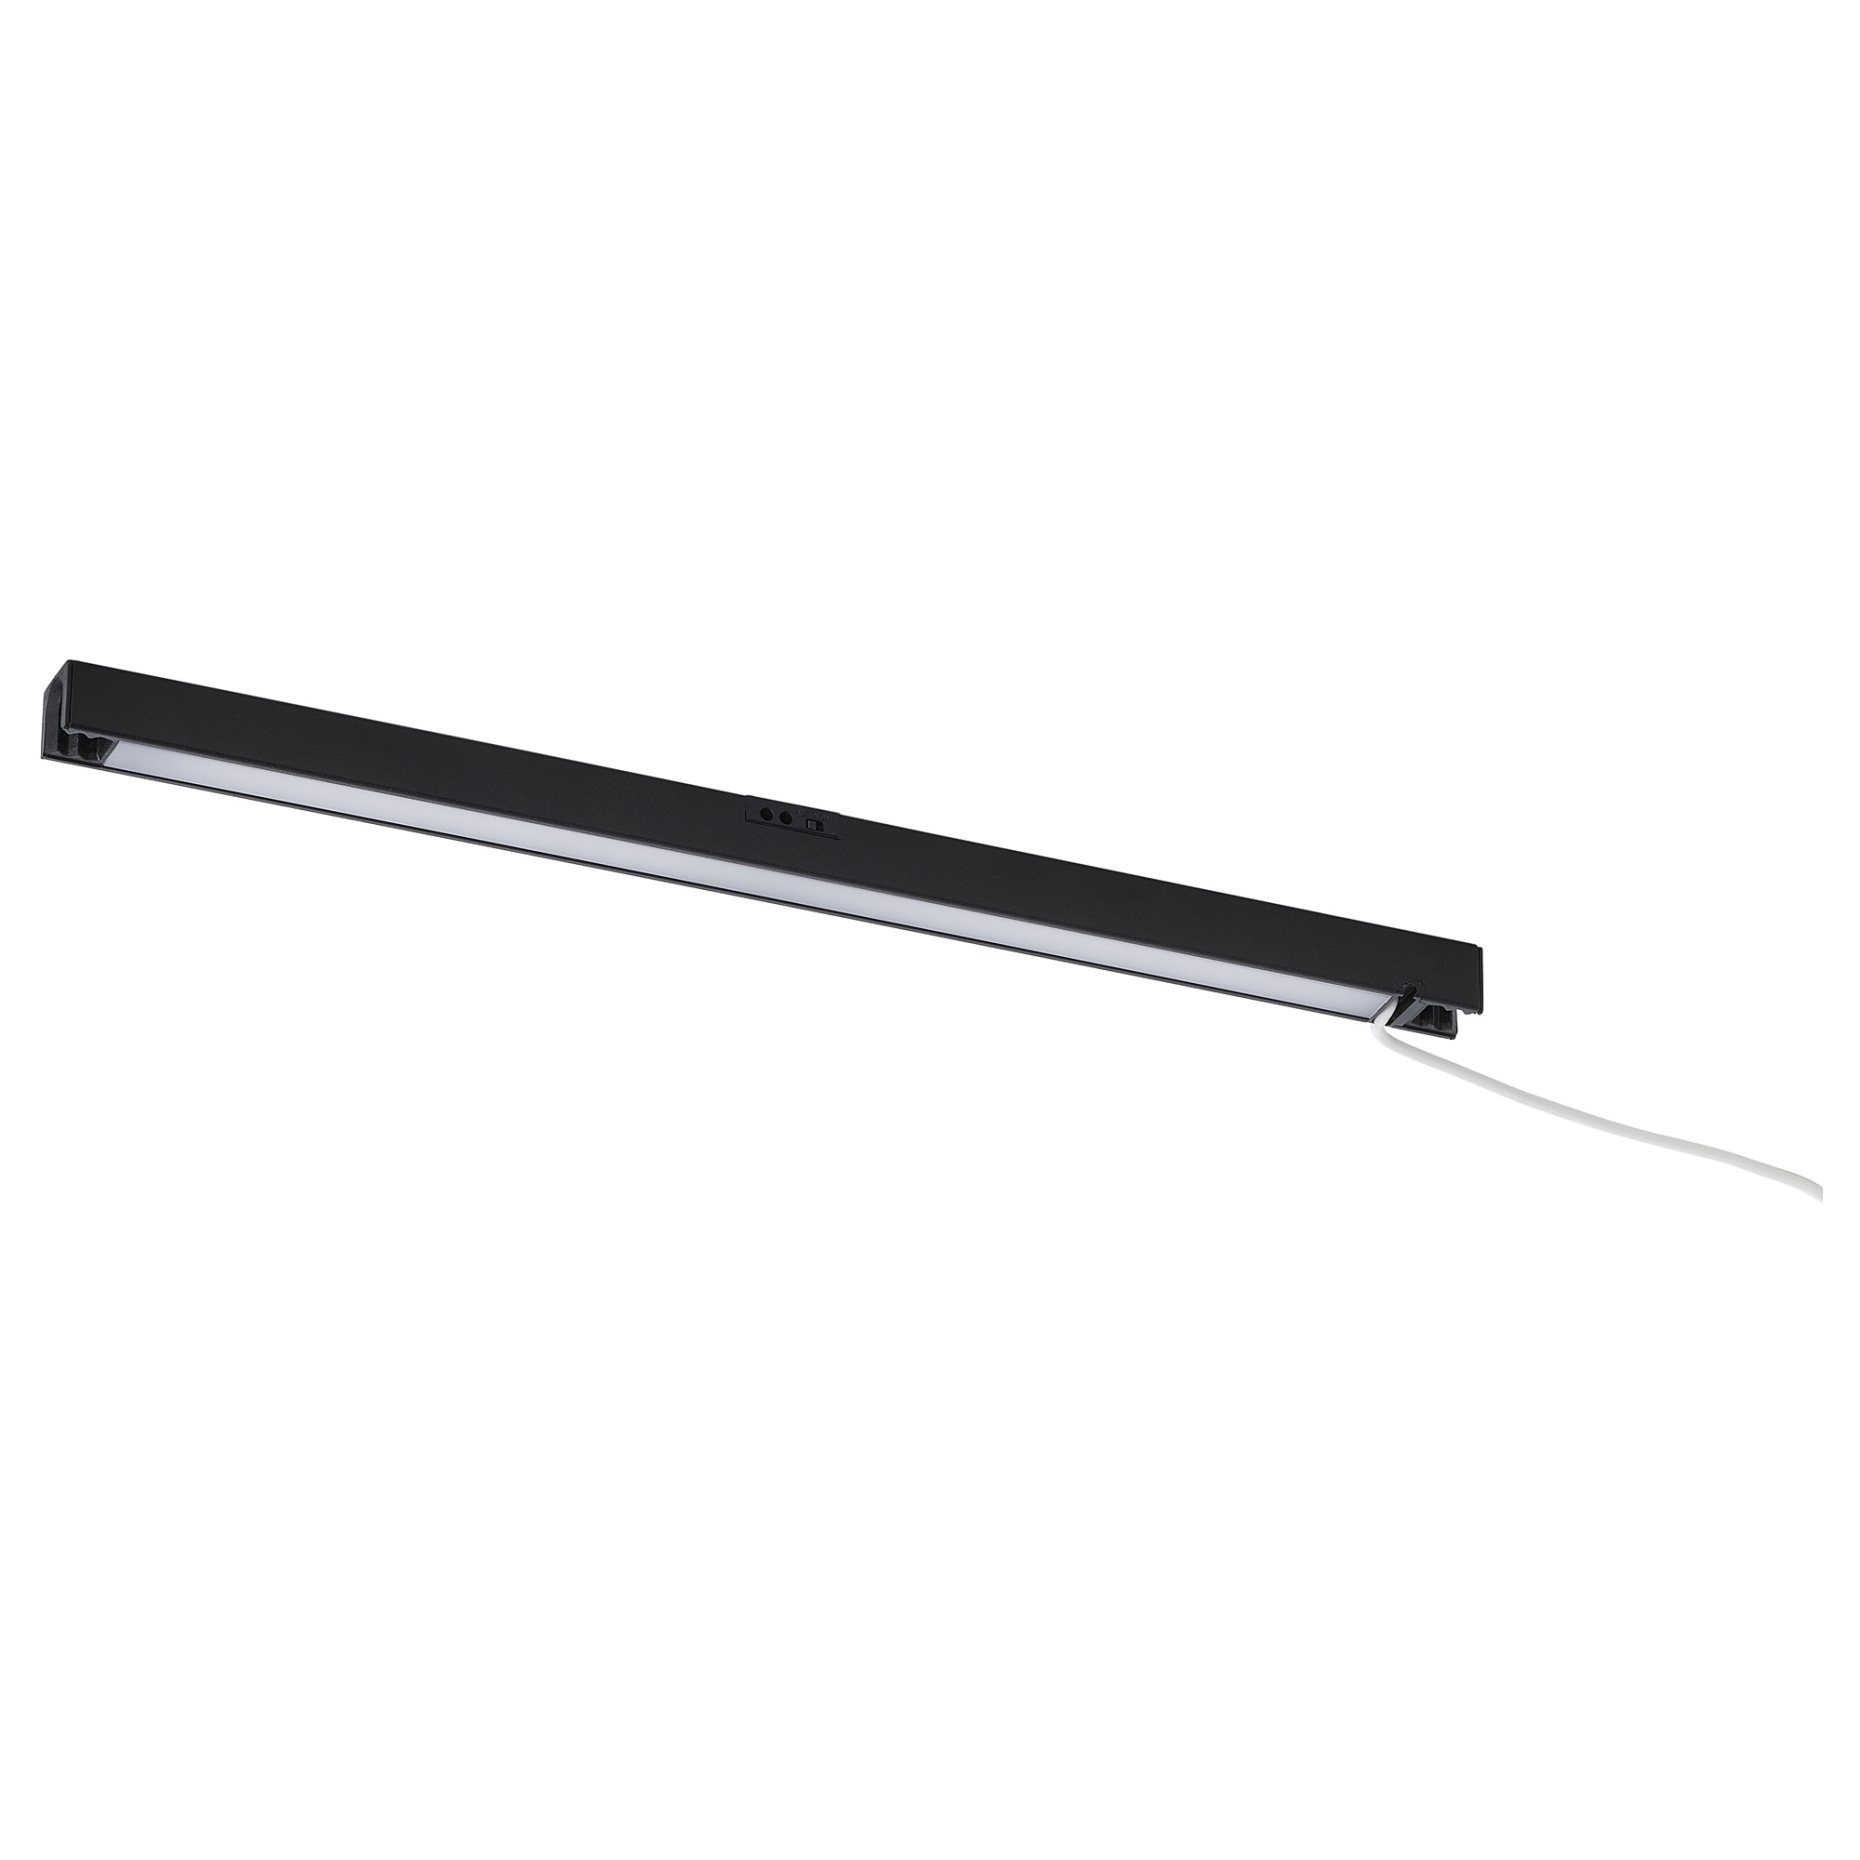 SKYDRAG, worktop/wardrobe lighting strip with sensor and built-in LED light source/dimmable, 60 cm, 505.292.30